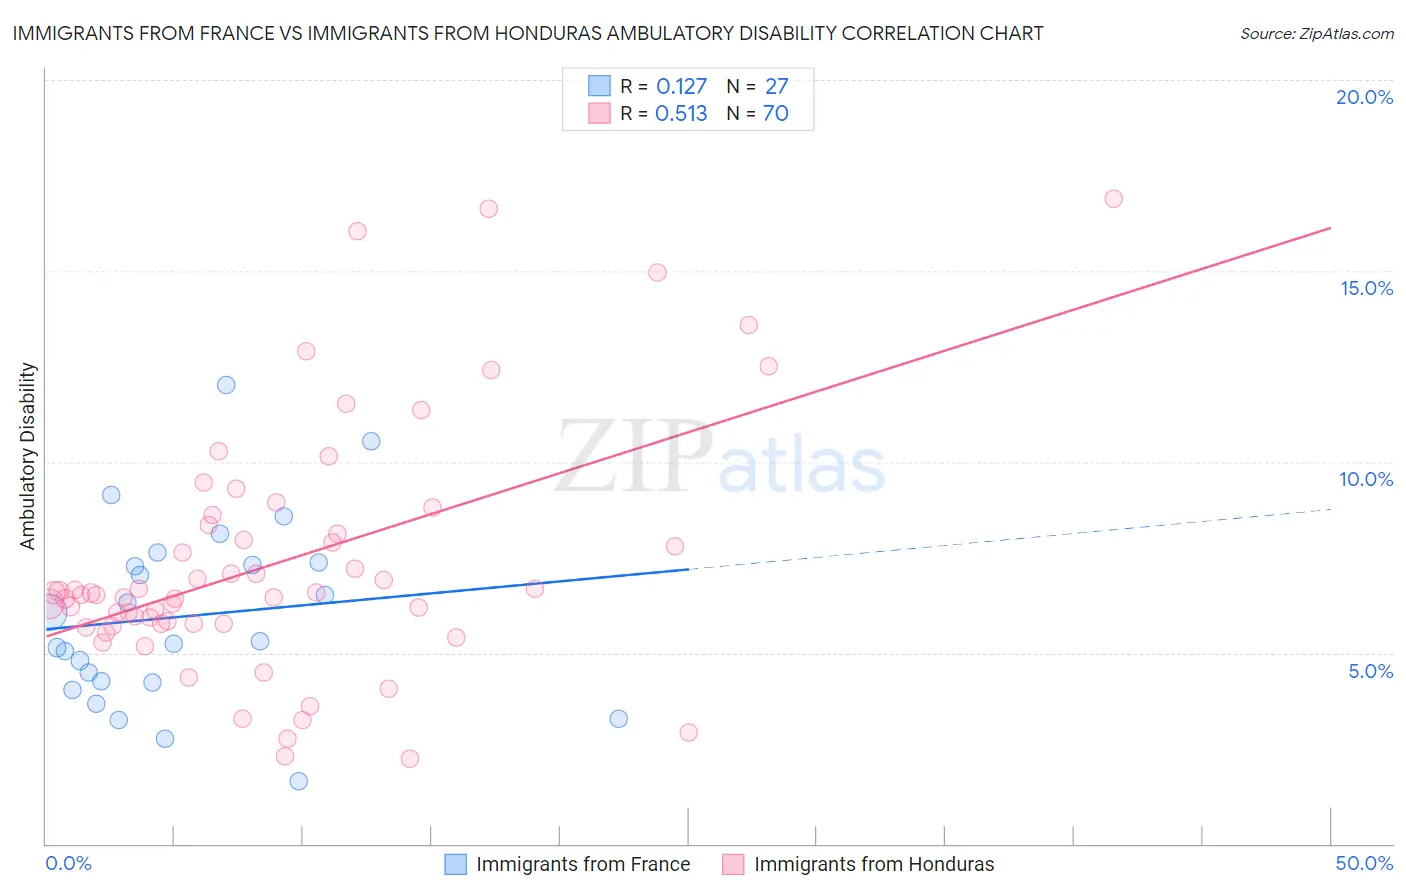 Immigrants from France vs Immigrants from Honduras Ambulatory Disability